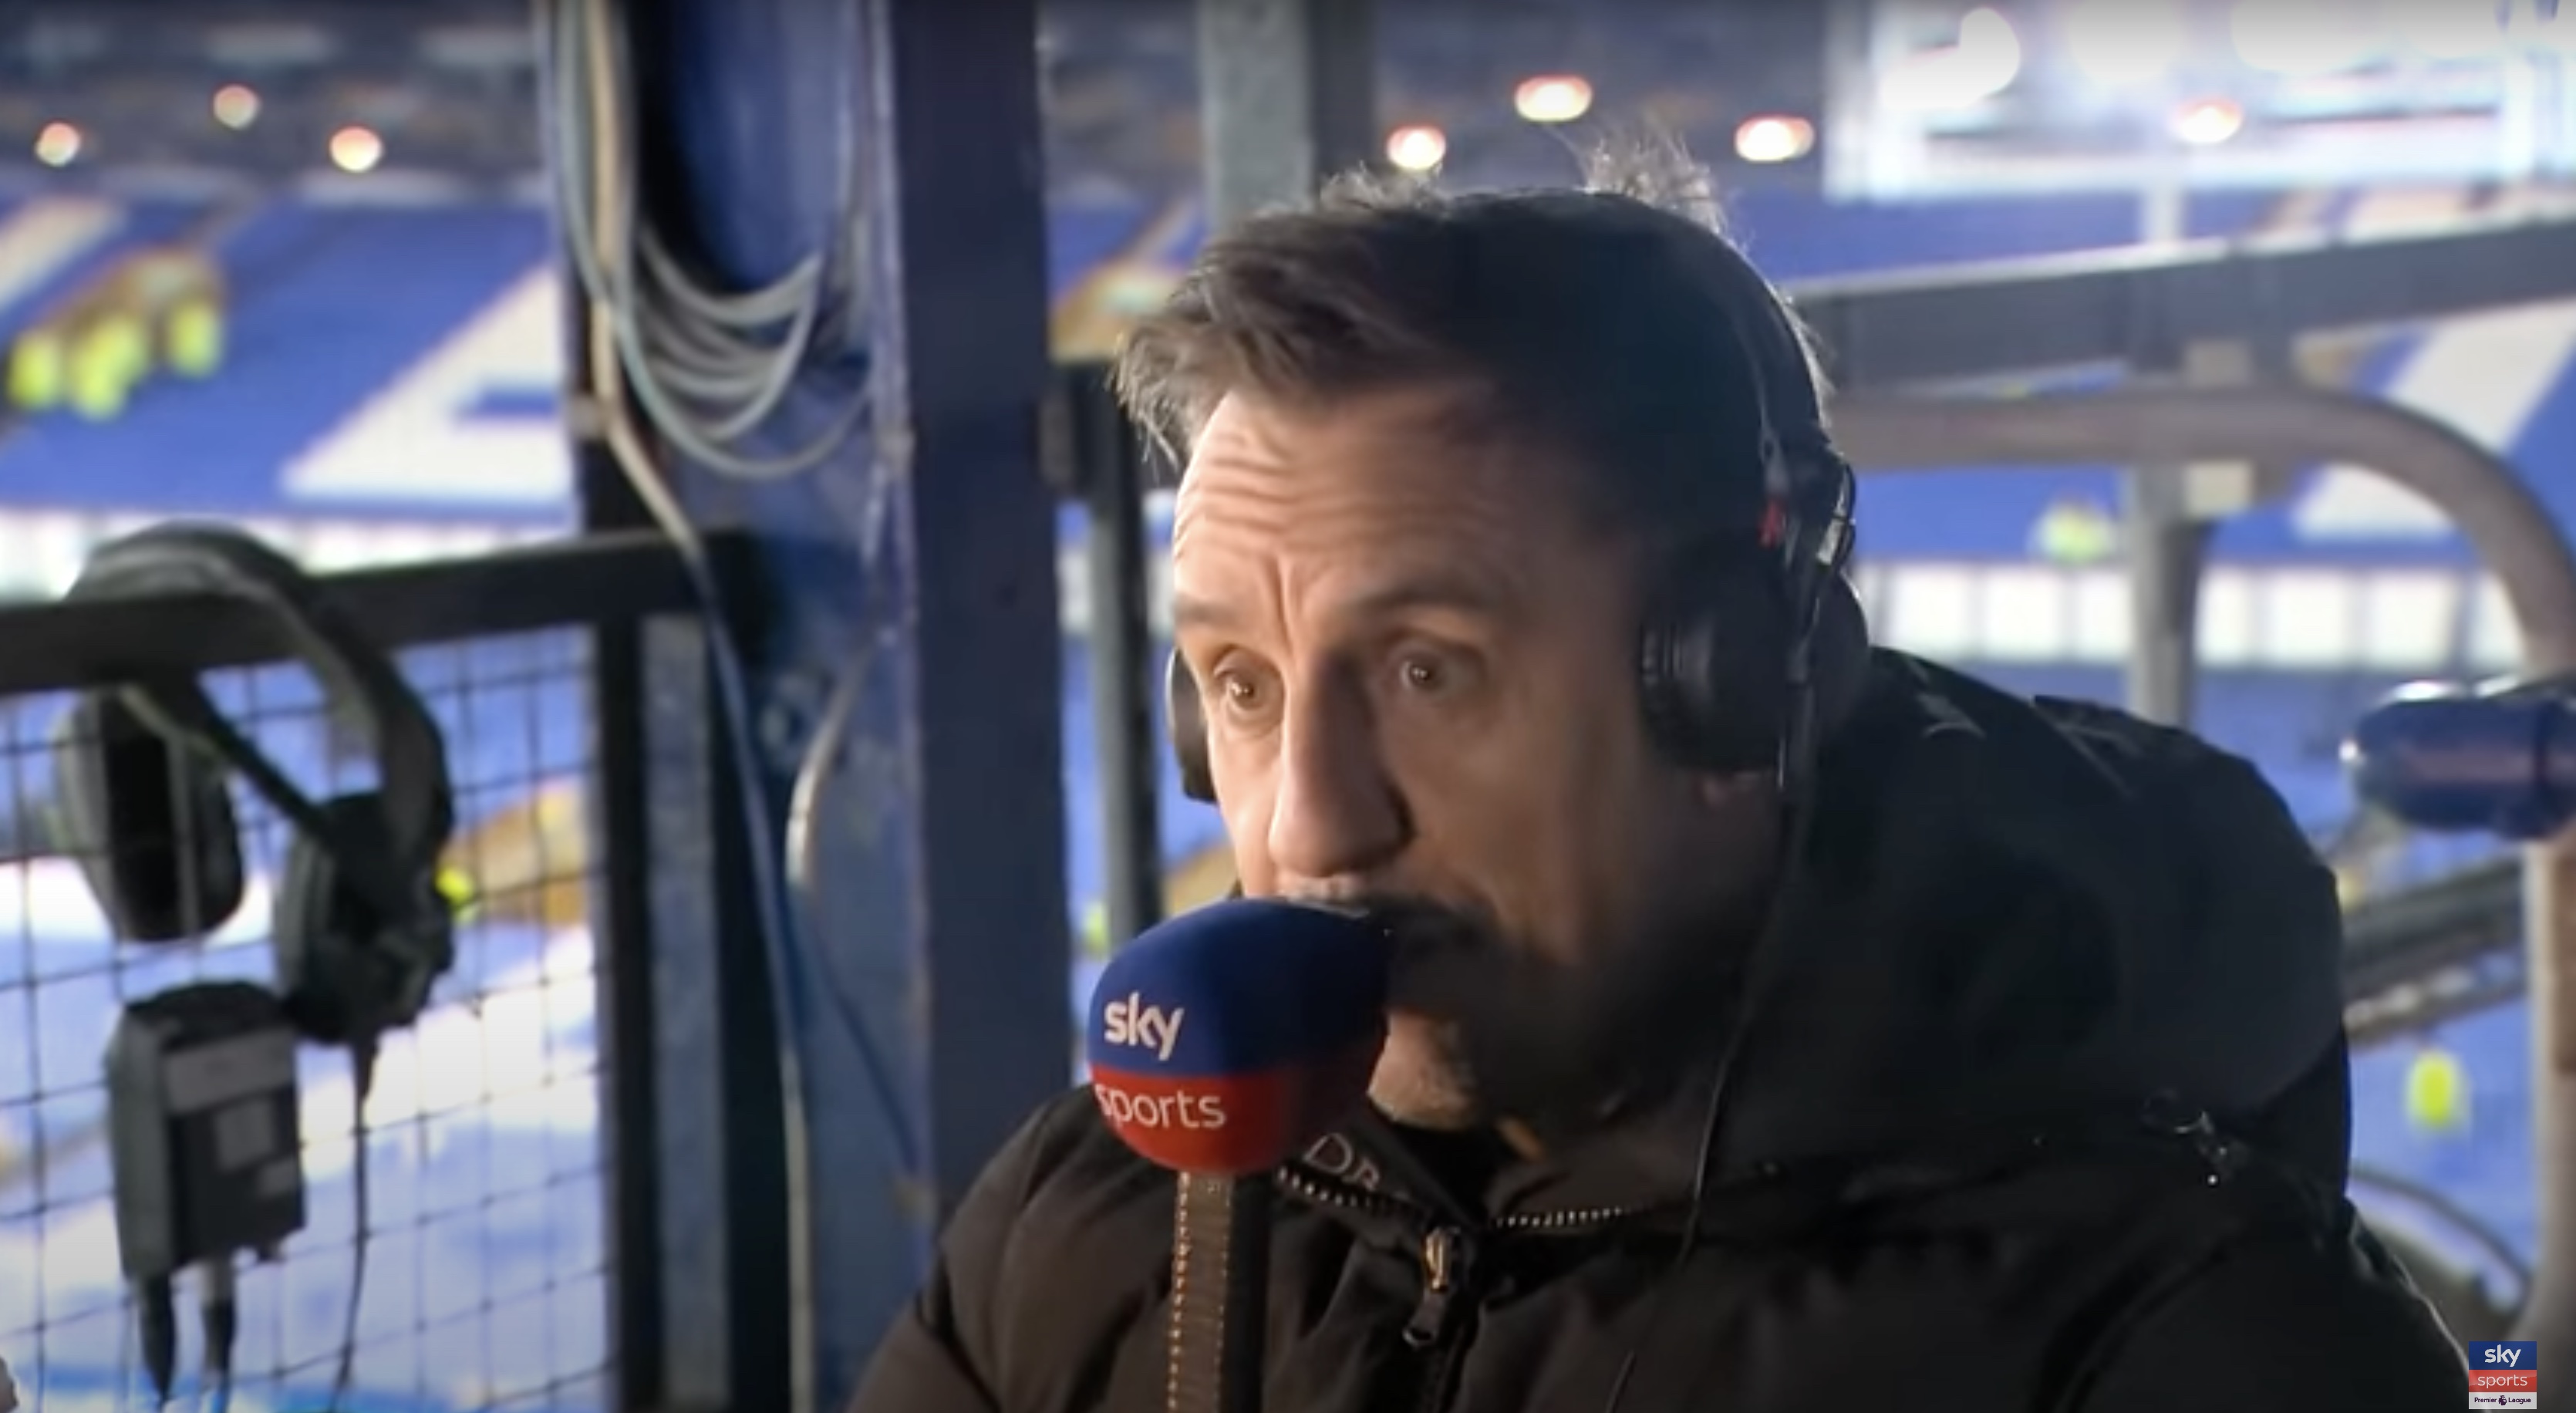 Gary Neville hails Arsenal star as best midfielder “in his position” ahead of north London derby